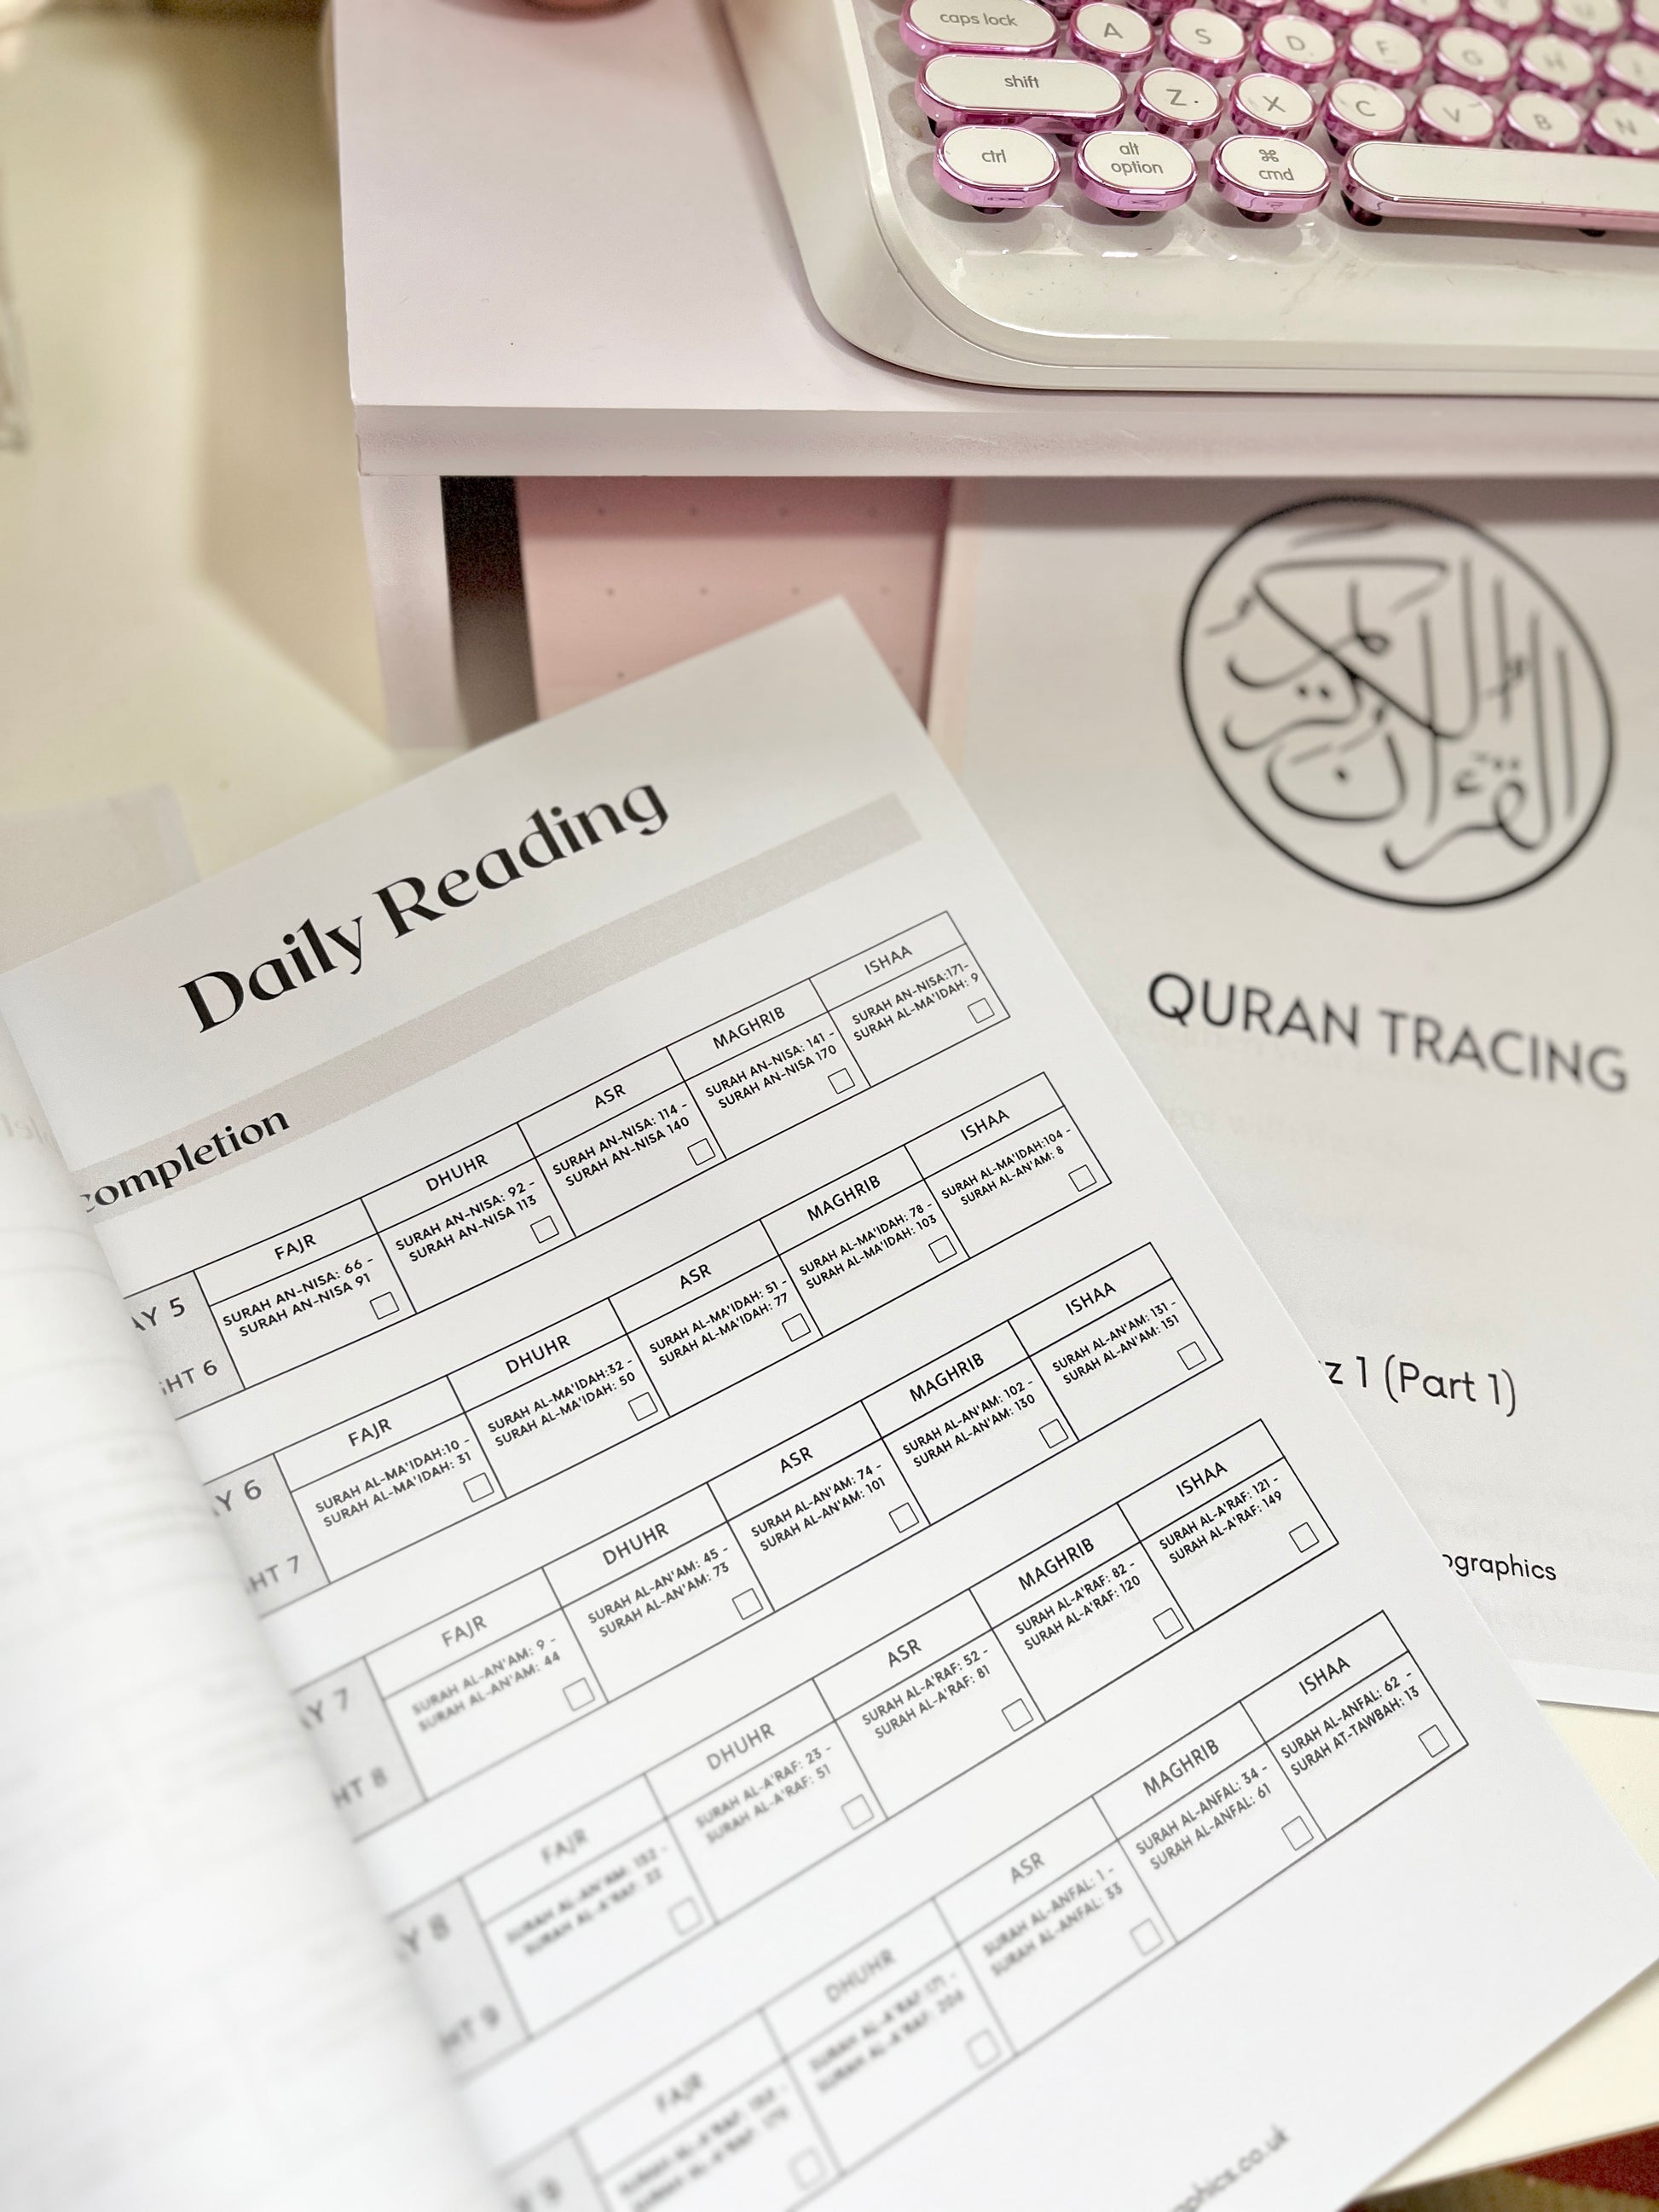 Ramadan Qur'an reading planner has been created to help you structure your Quran reading throughout the entire month, by following the schedule provided after every Salat.